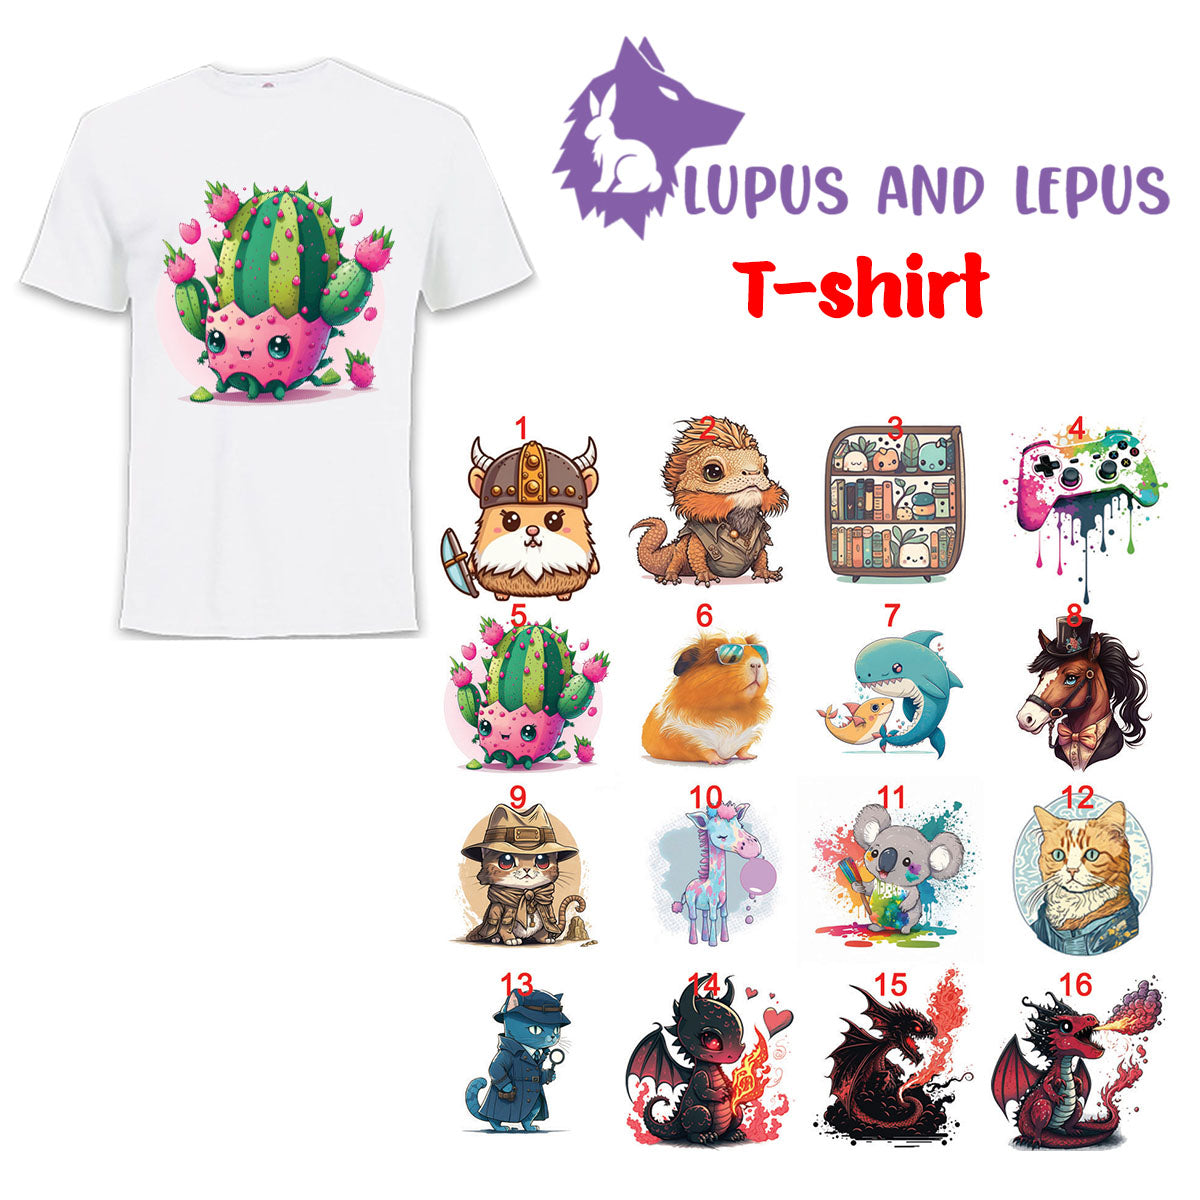 WHITE polyester sublimation tshirt (E)- adult , adult sizes, my art, my designs, dragon, dragons, bunny, cat, kitty, books, nerd, neardy, geek, gamer, game,  sublimated by me